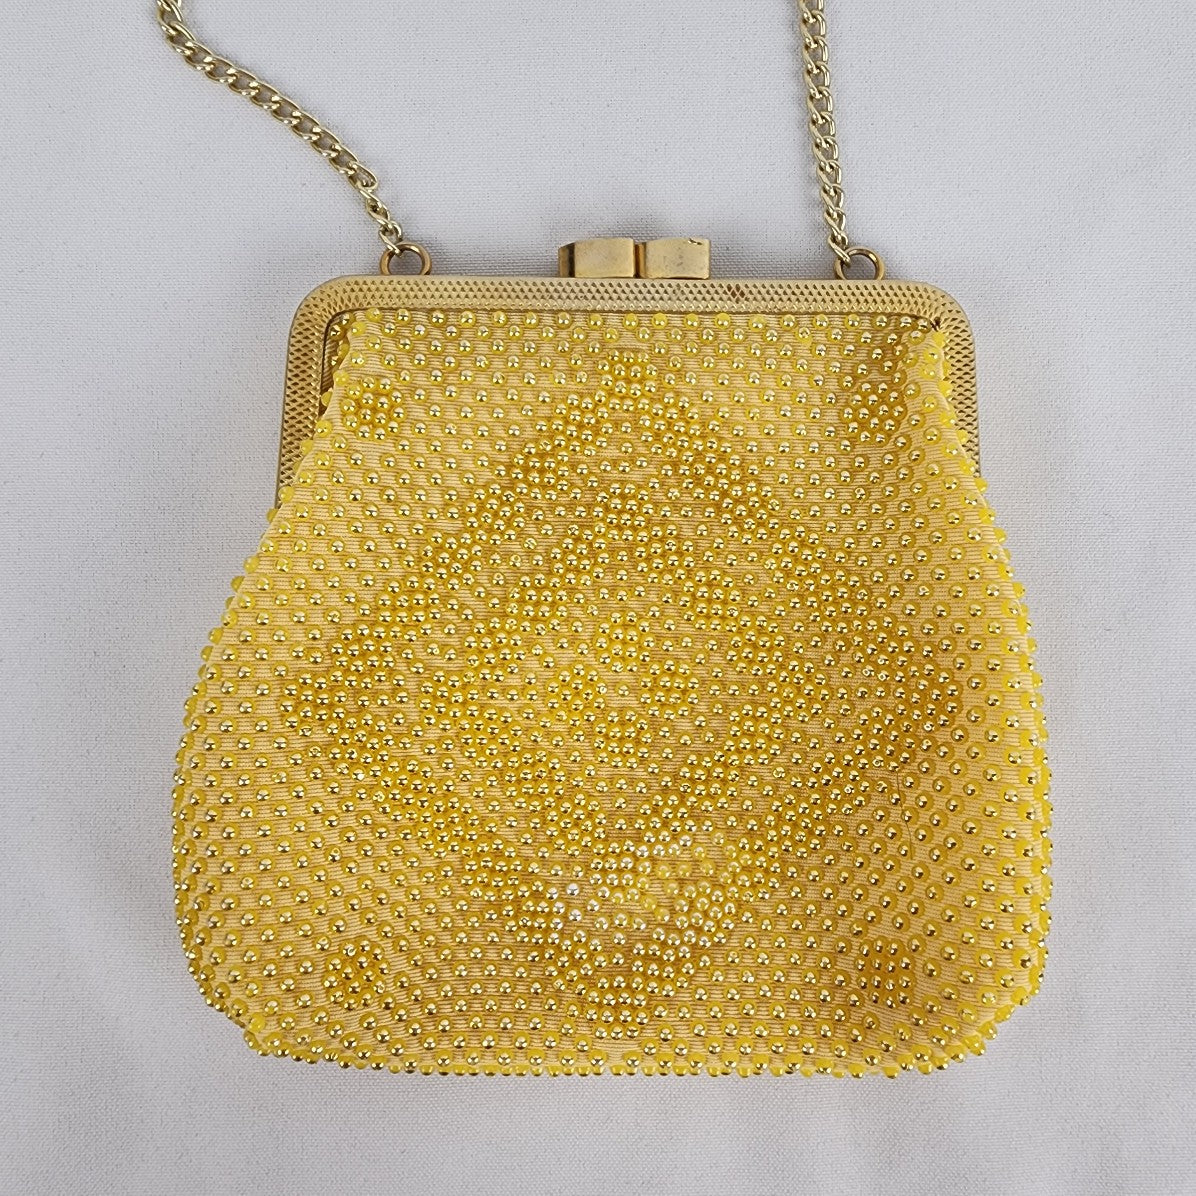 Vintage Gold Tone Yellow Beaded Clutch Purse